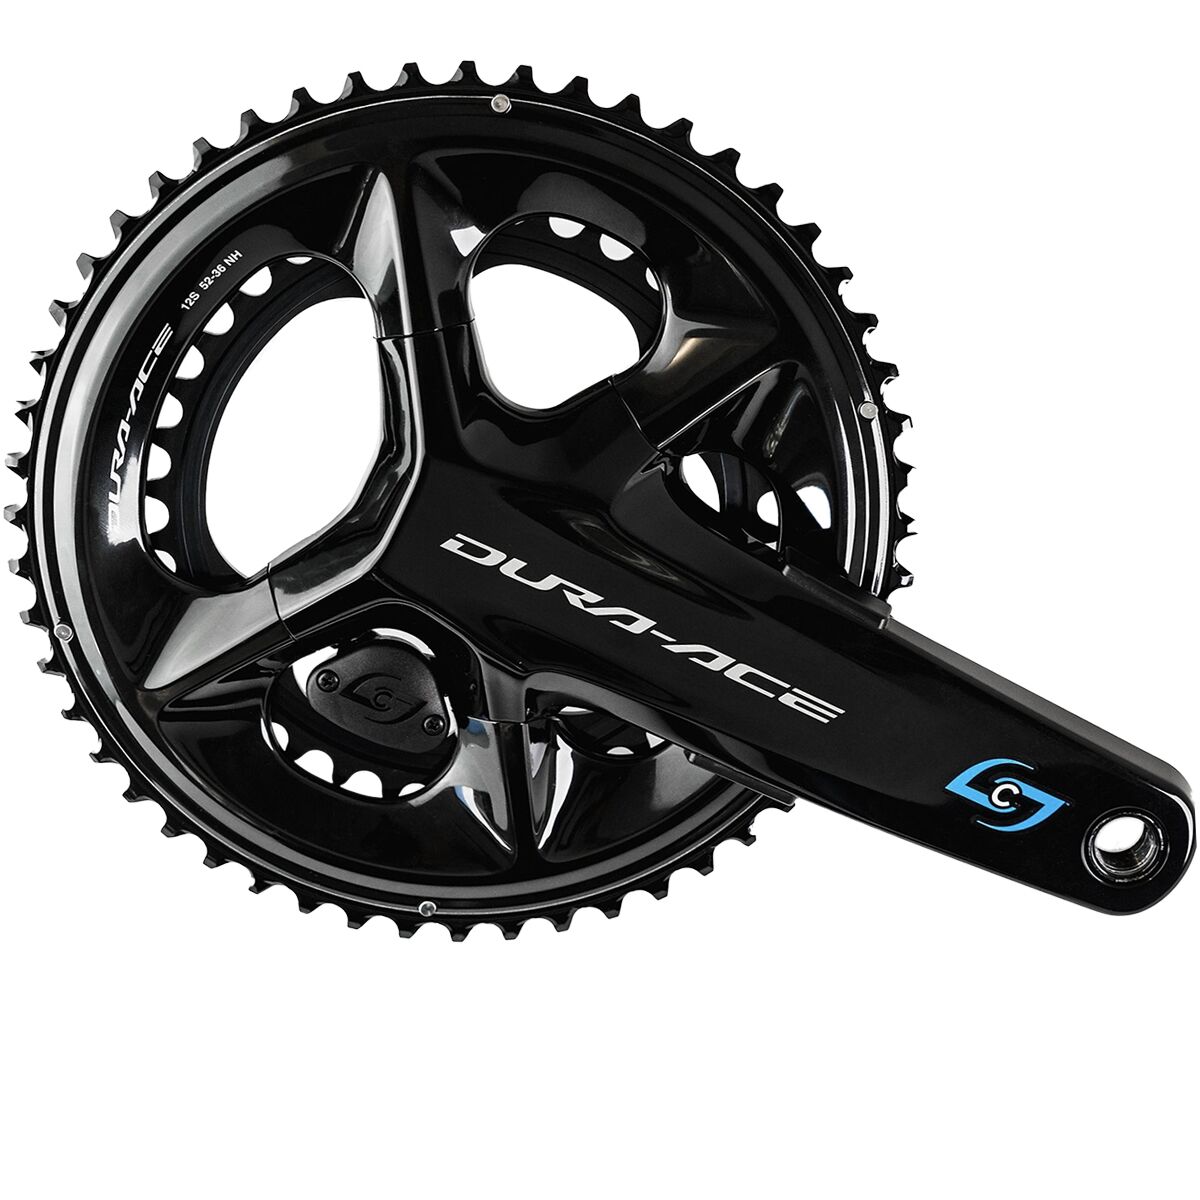 Stages Cycling Shimano Dura-Ace R9200 R Gen 3 Power Meter Crank Arm Black, 172.5mm, 54/40 -  D92R-D0